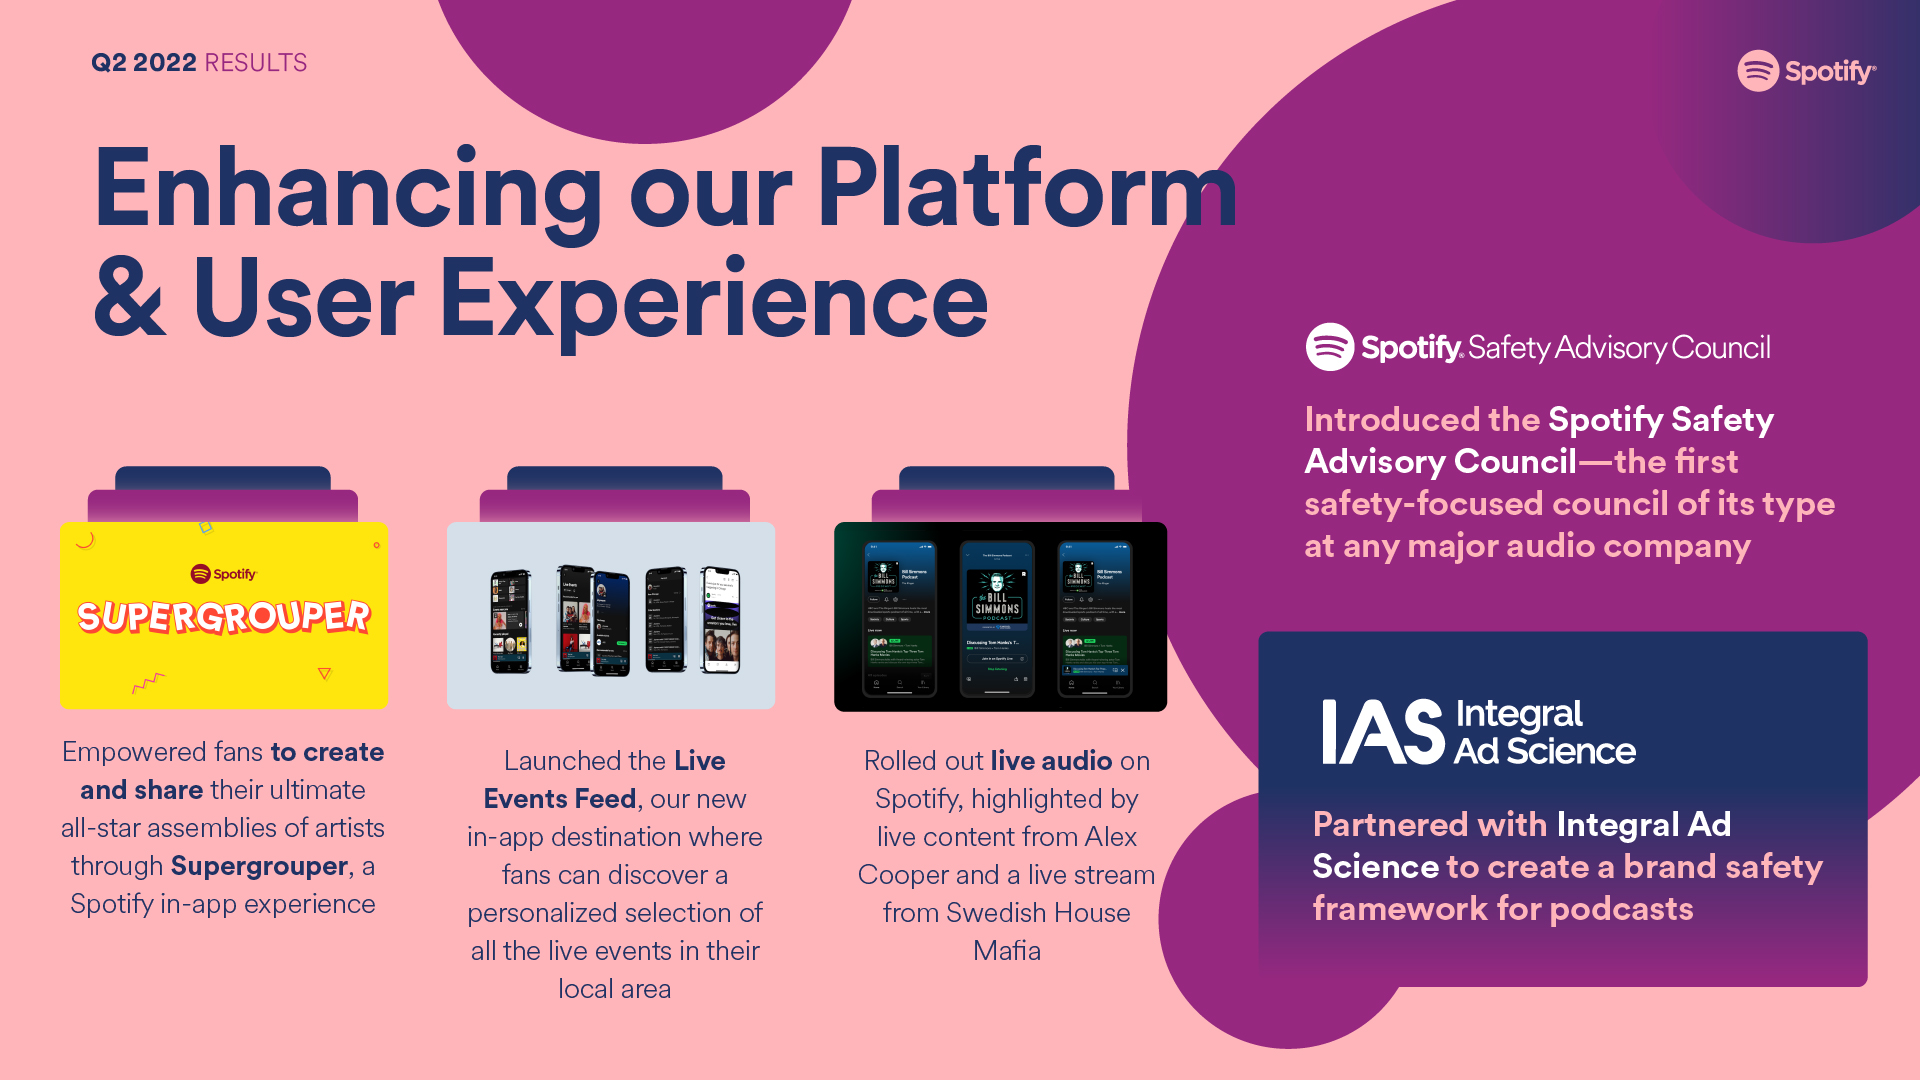 Spotify Enhancing our Platform & User Experience